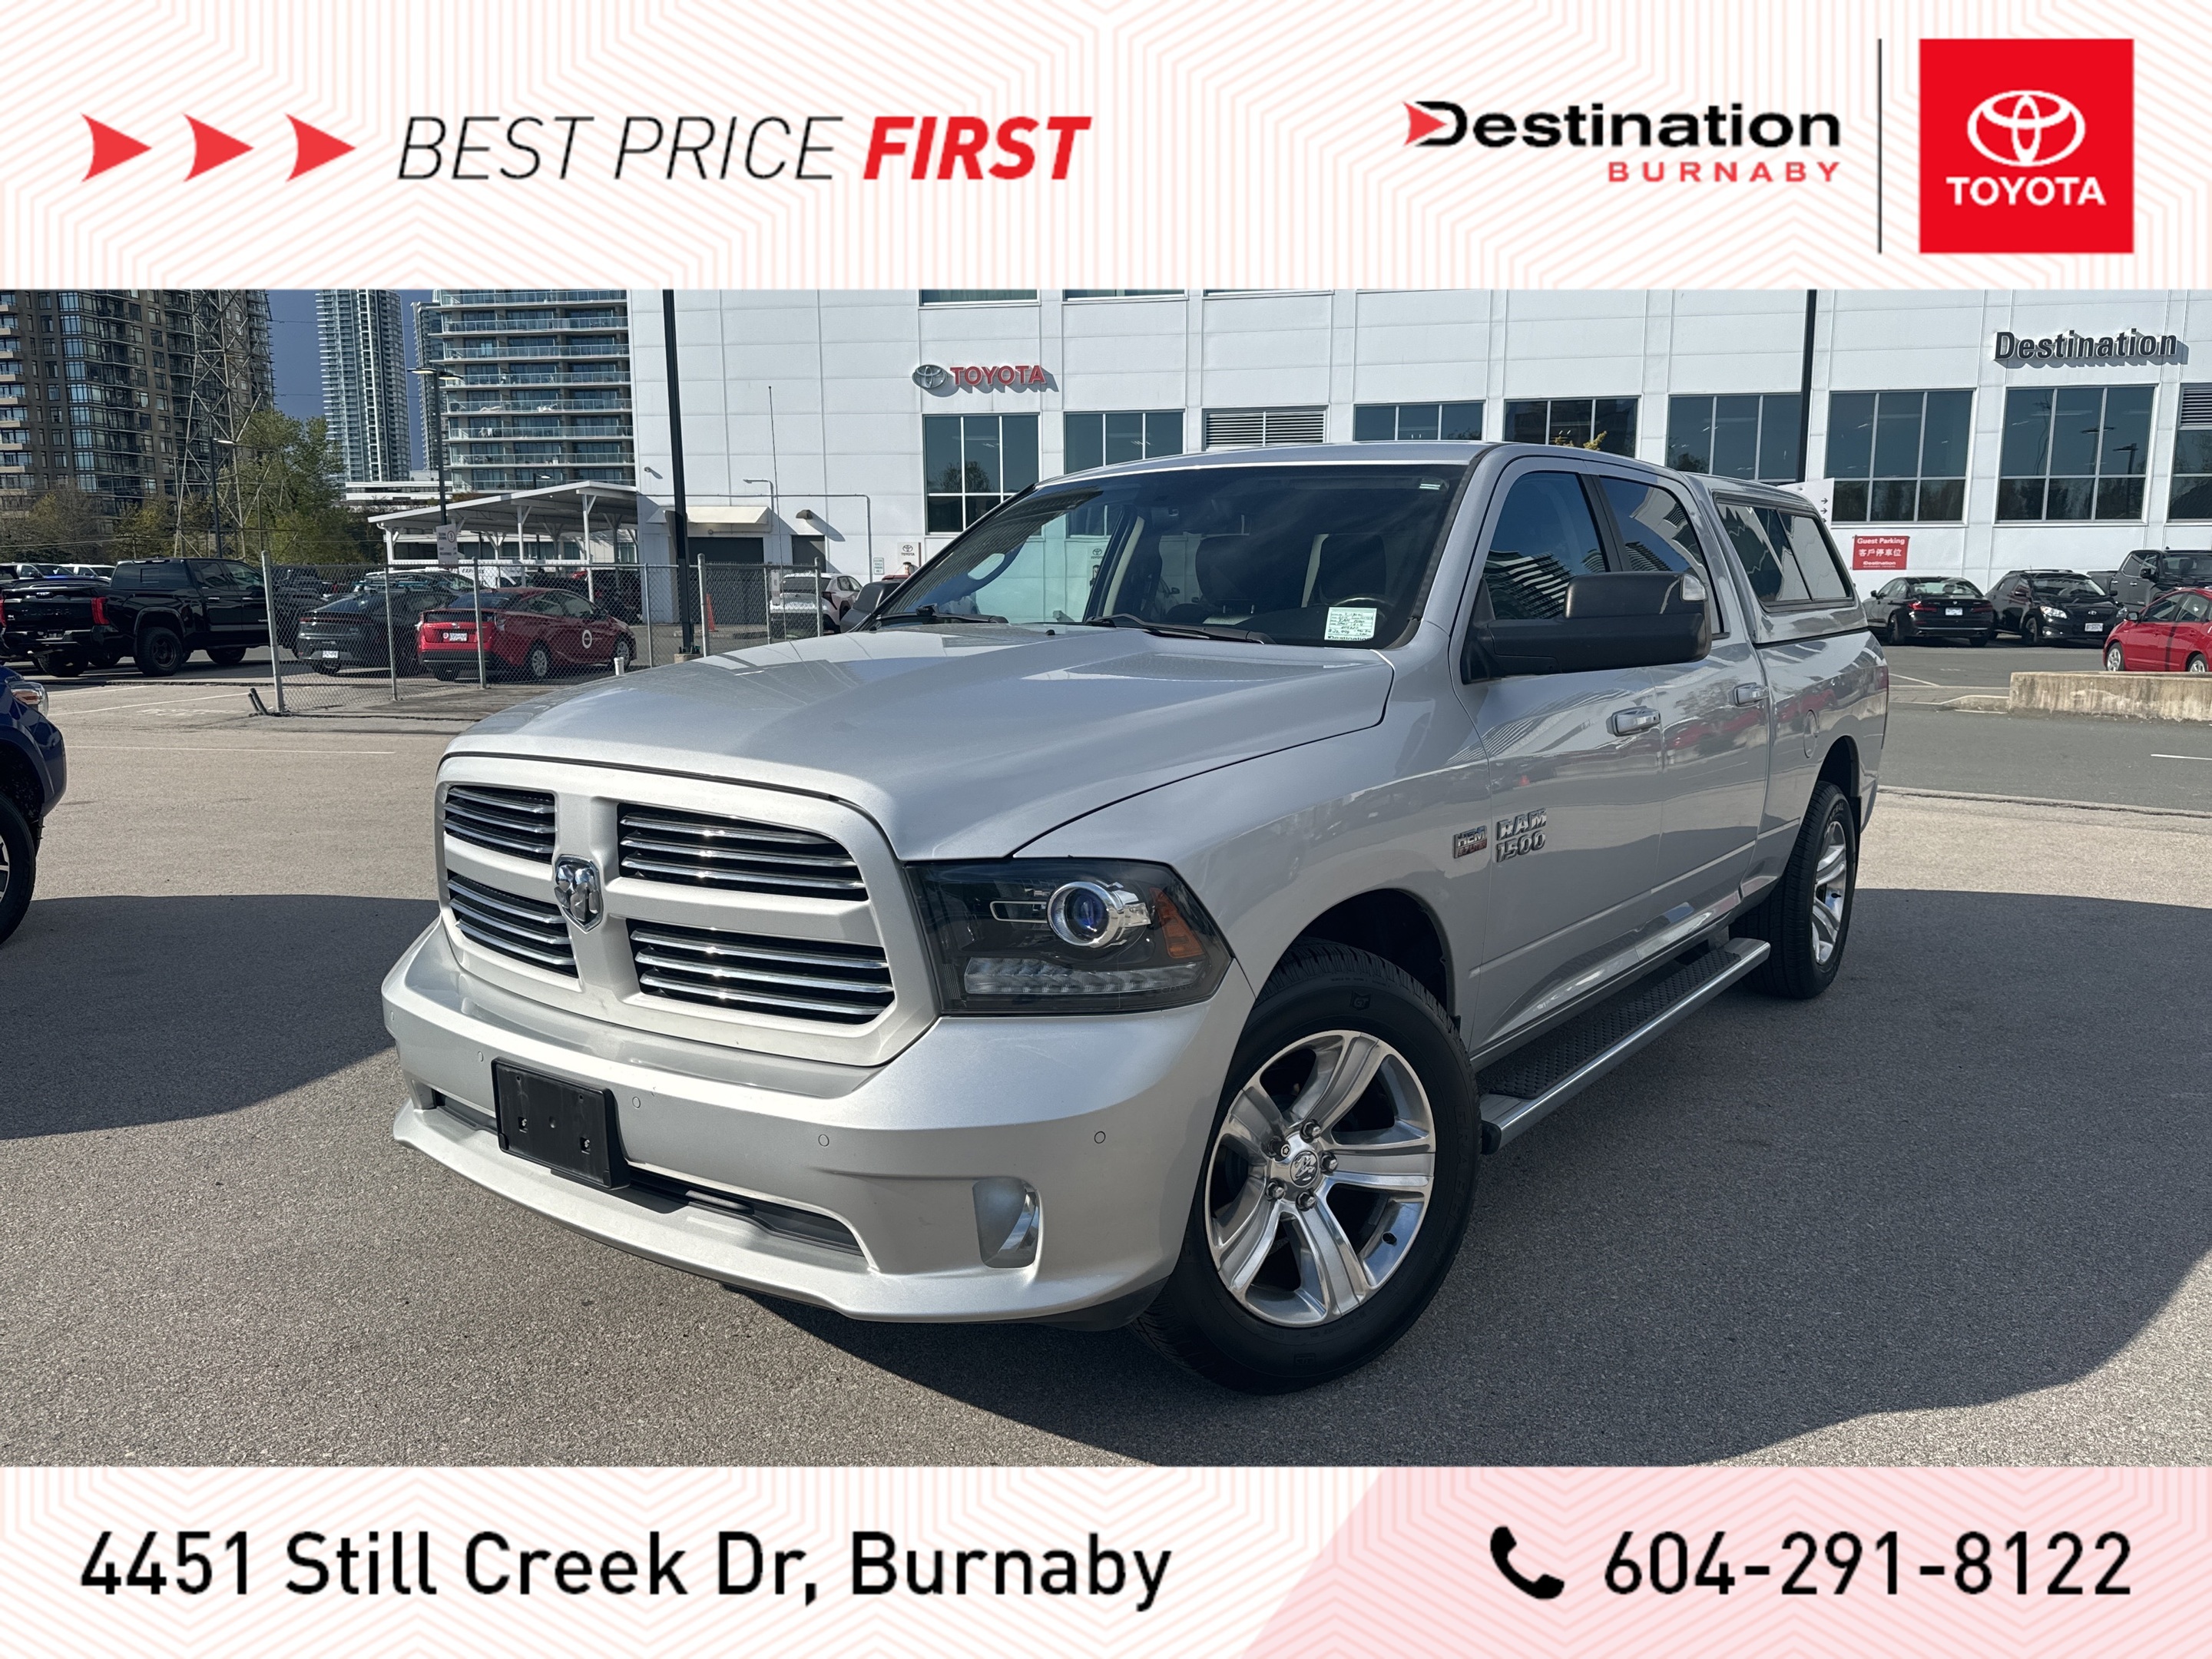 2015 Ram 1500 Sport - Local No Accidents! New Tires!